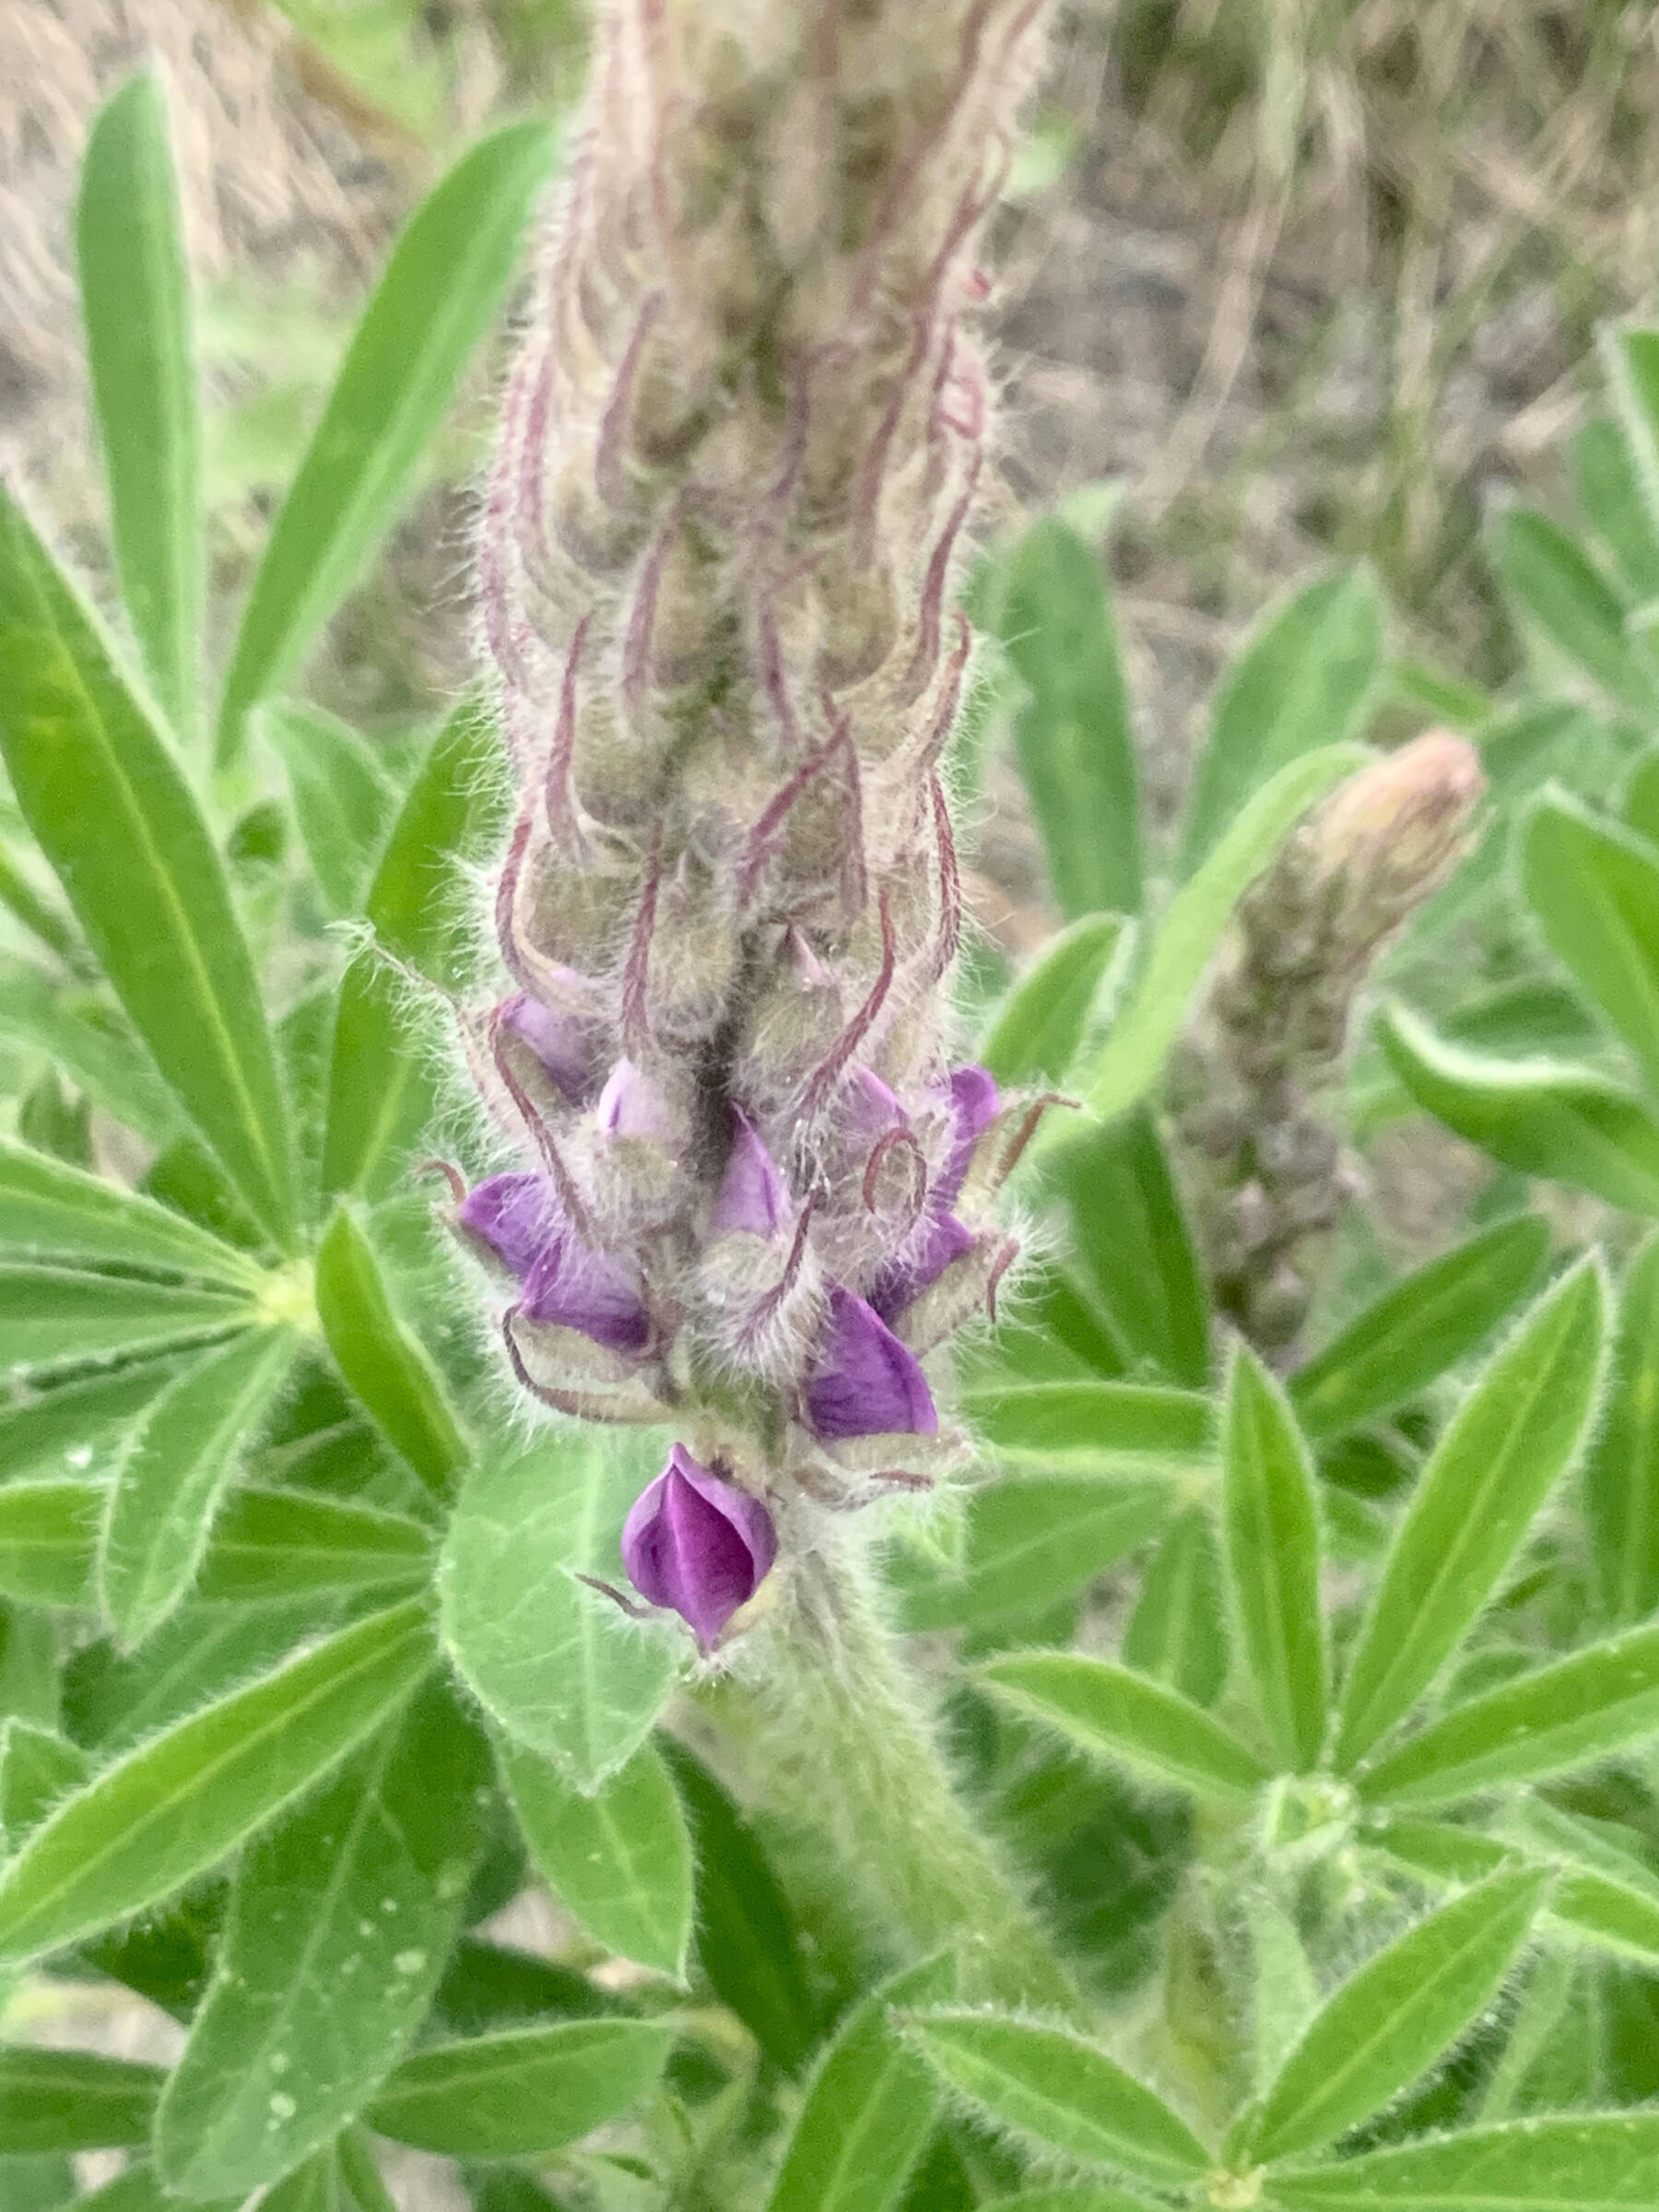 A lupine flower begins to bud four miles out East End Road on Saturday, June 3, 2023 in Homer, Alaska. Photo by Christina Whiting